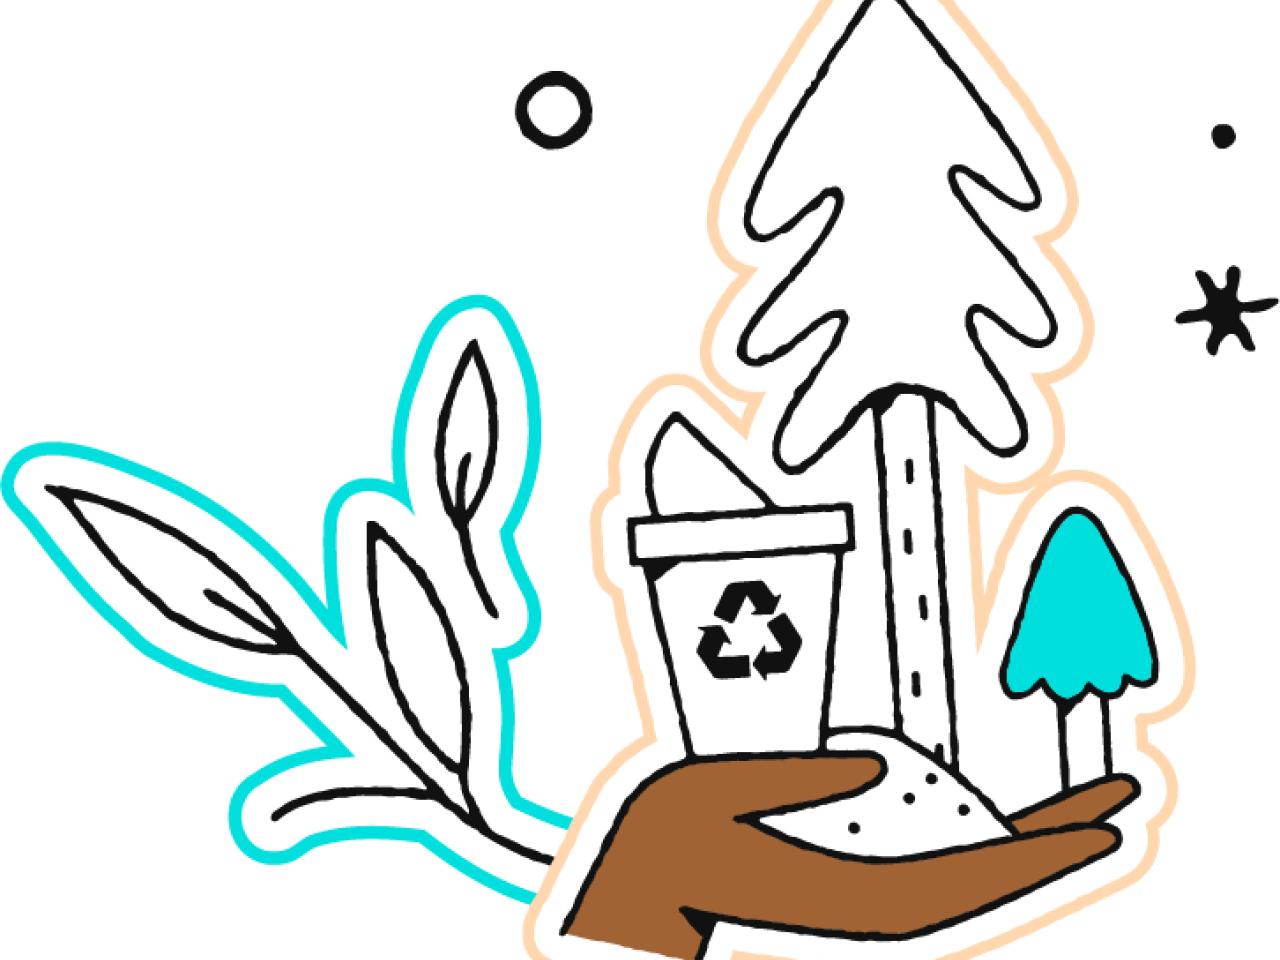 Illustration of a hand holding a tree and a cup with a recycle symbol.